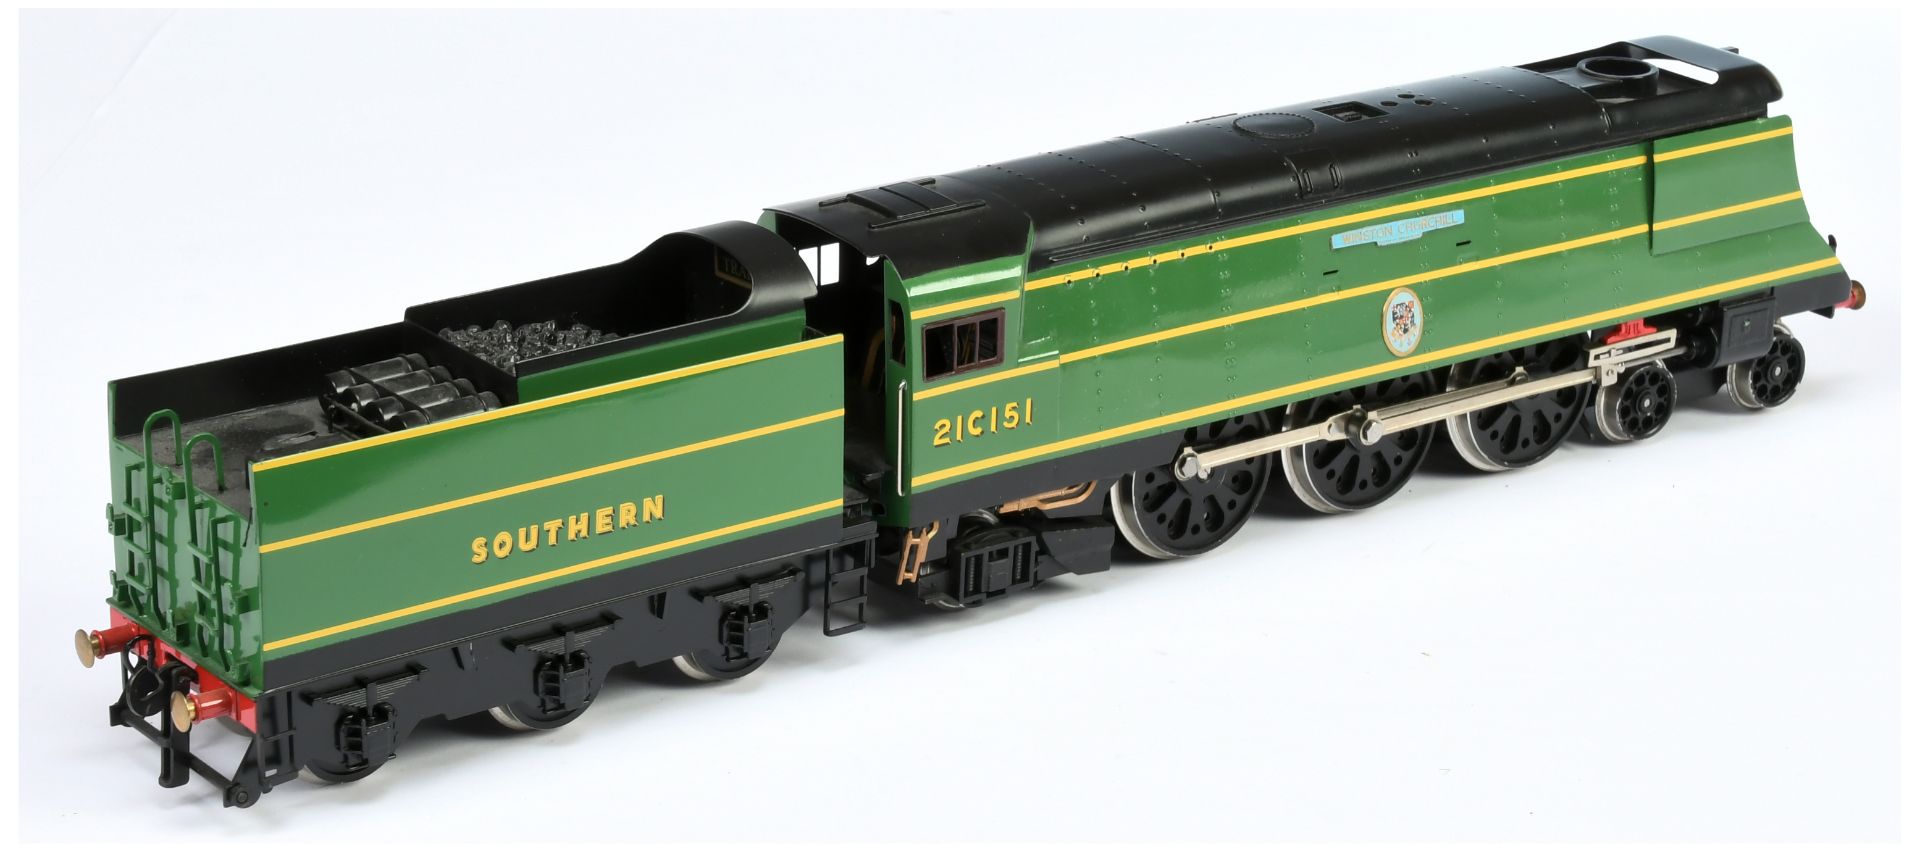 Ace Trains O Gauge 4-6-2 SR Green 21C151 Winston Churchill Bullied Pacific - Image 2 of 2